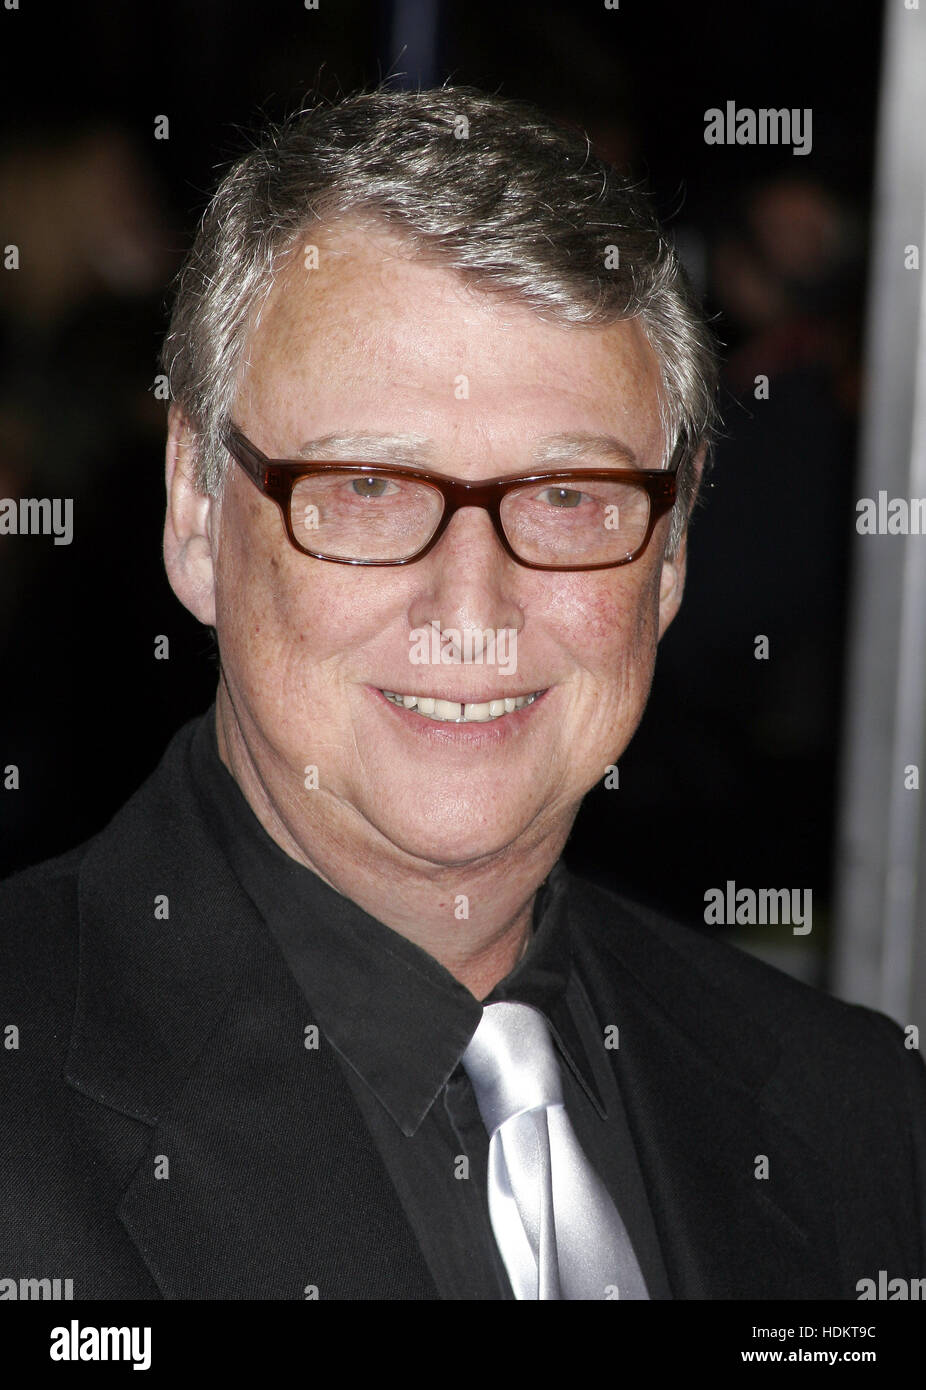 Director Mike Nichols at the premiere of the film, 'Closer' at Mann Village theatre on November 22, 2004 in Los Angeles. Photo credit: Francis Specker Stock Photo